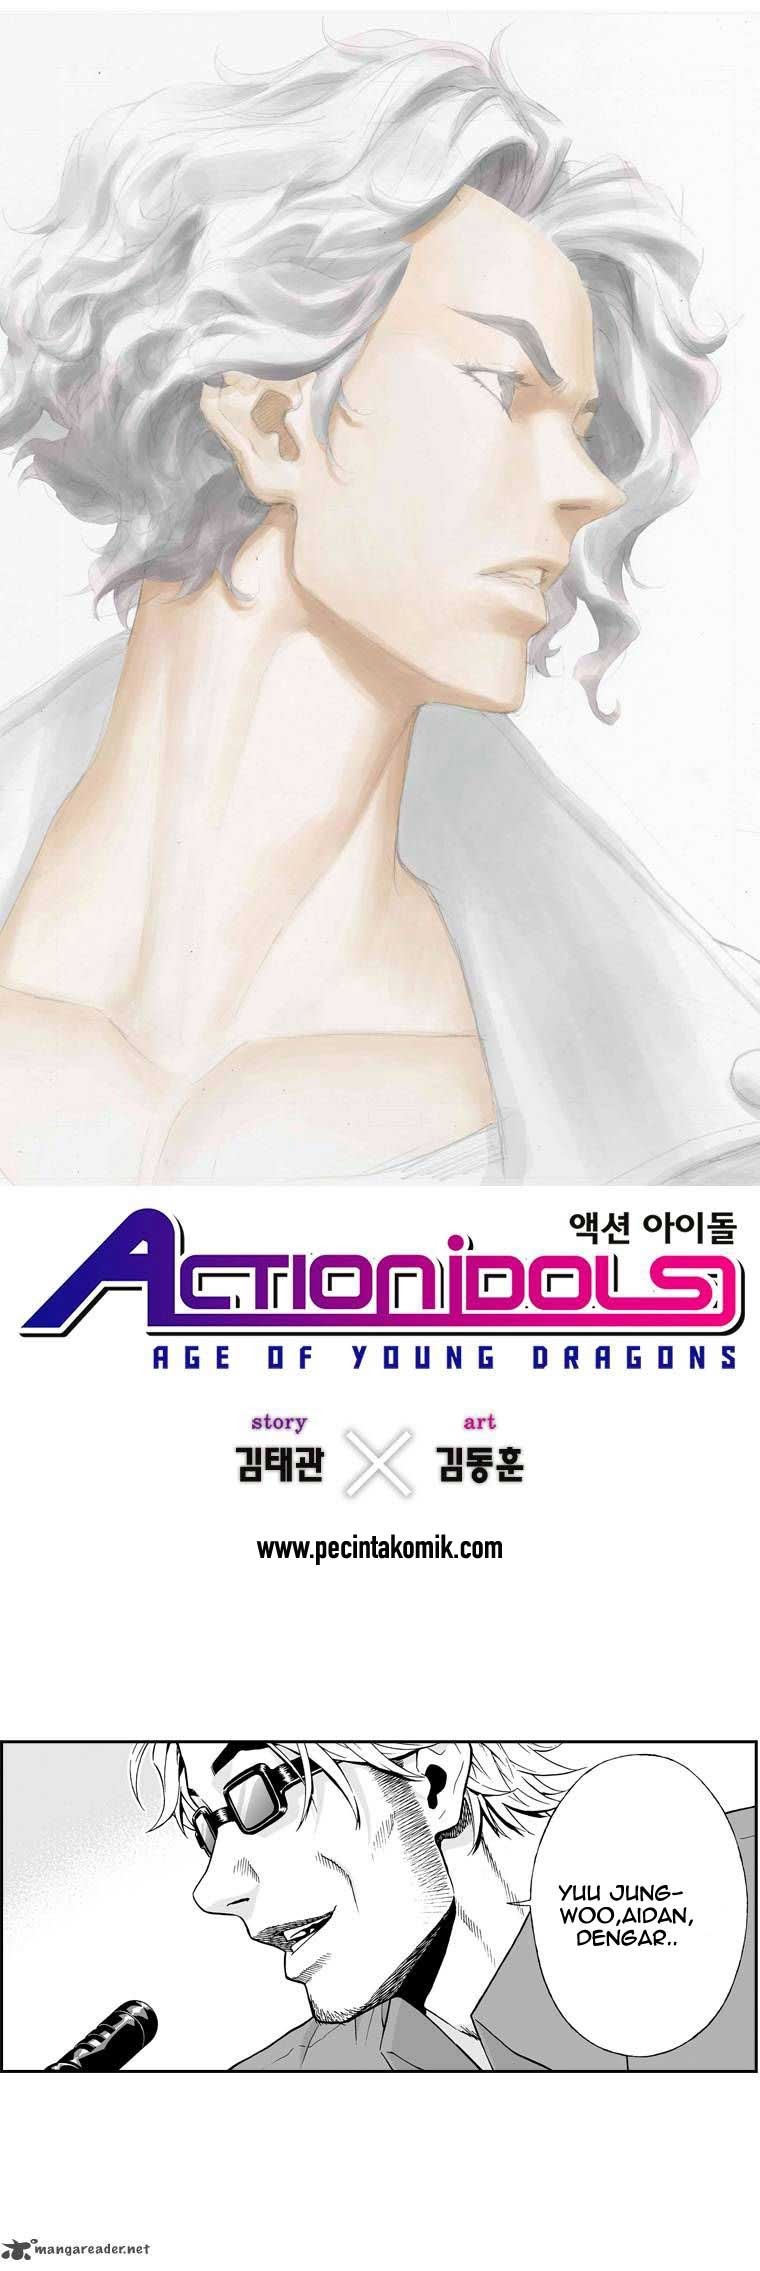 Action Idols – Age of Young Dragons Chapter 12